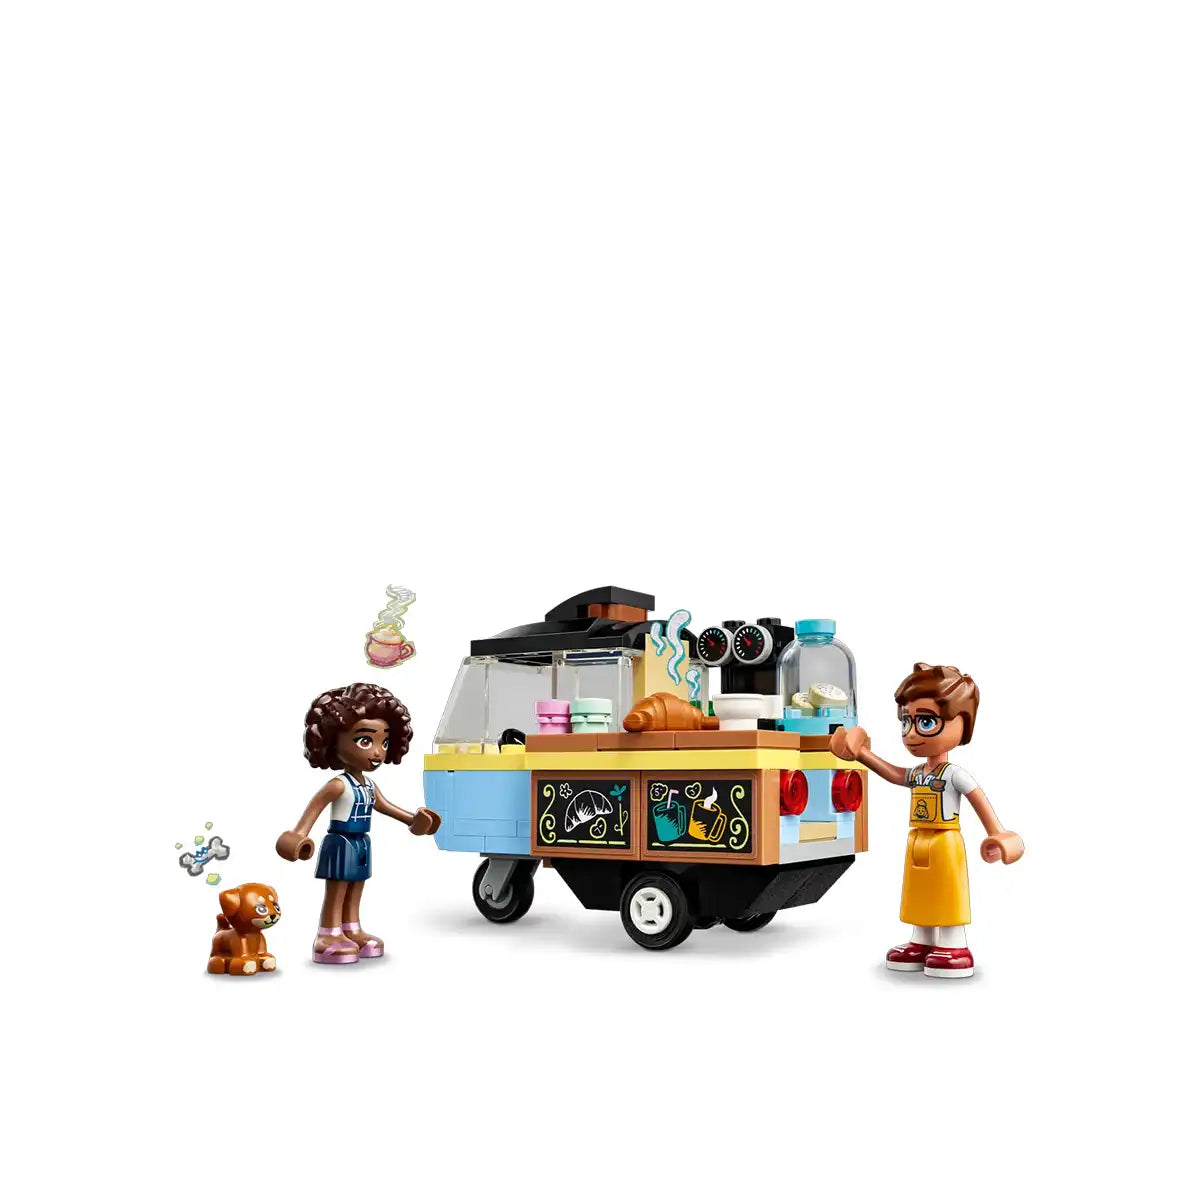 Lego Friends Mobile Bakery Food Cart 42606 - Albagame